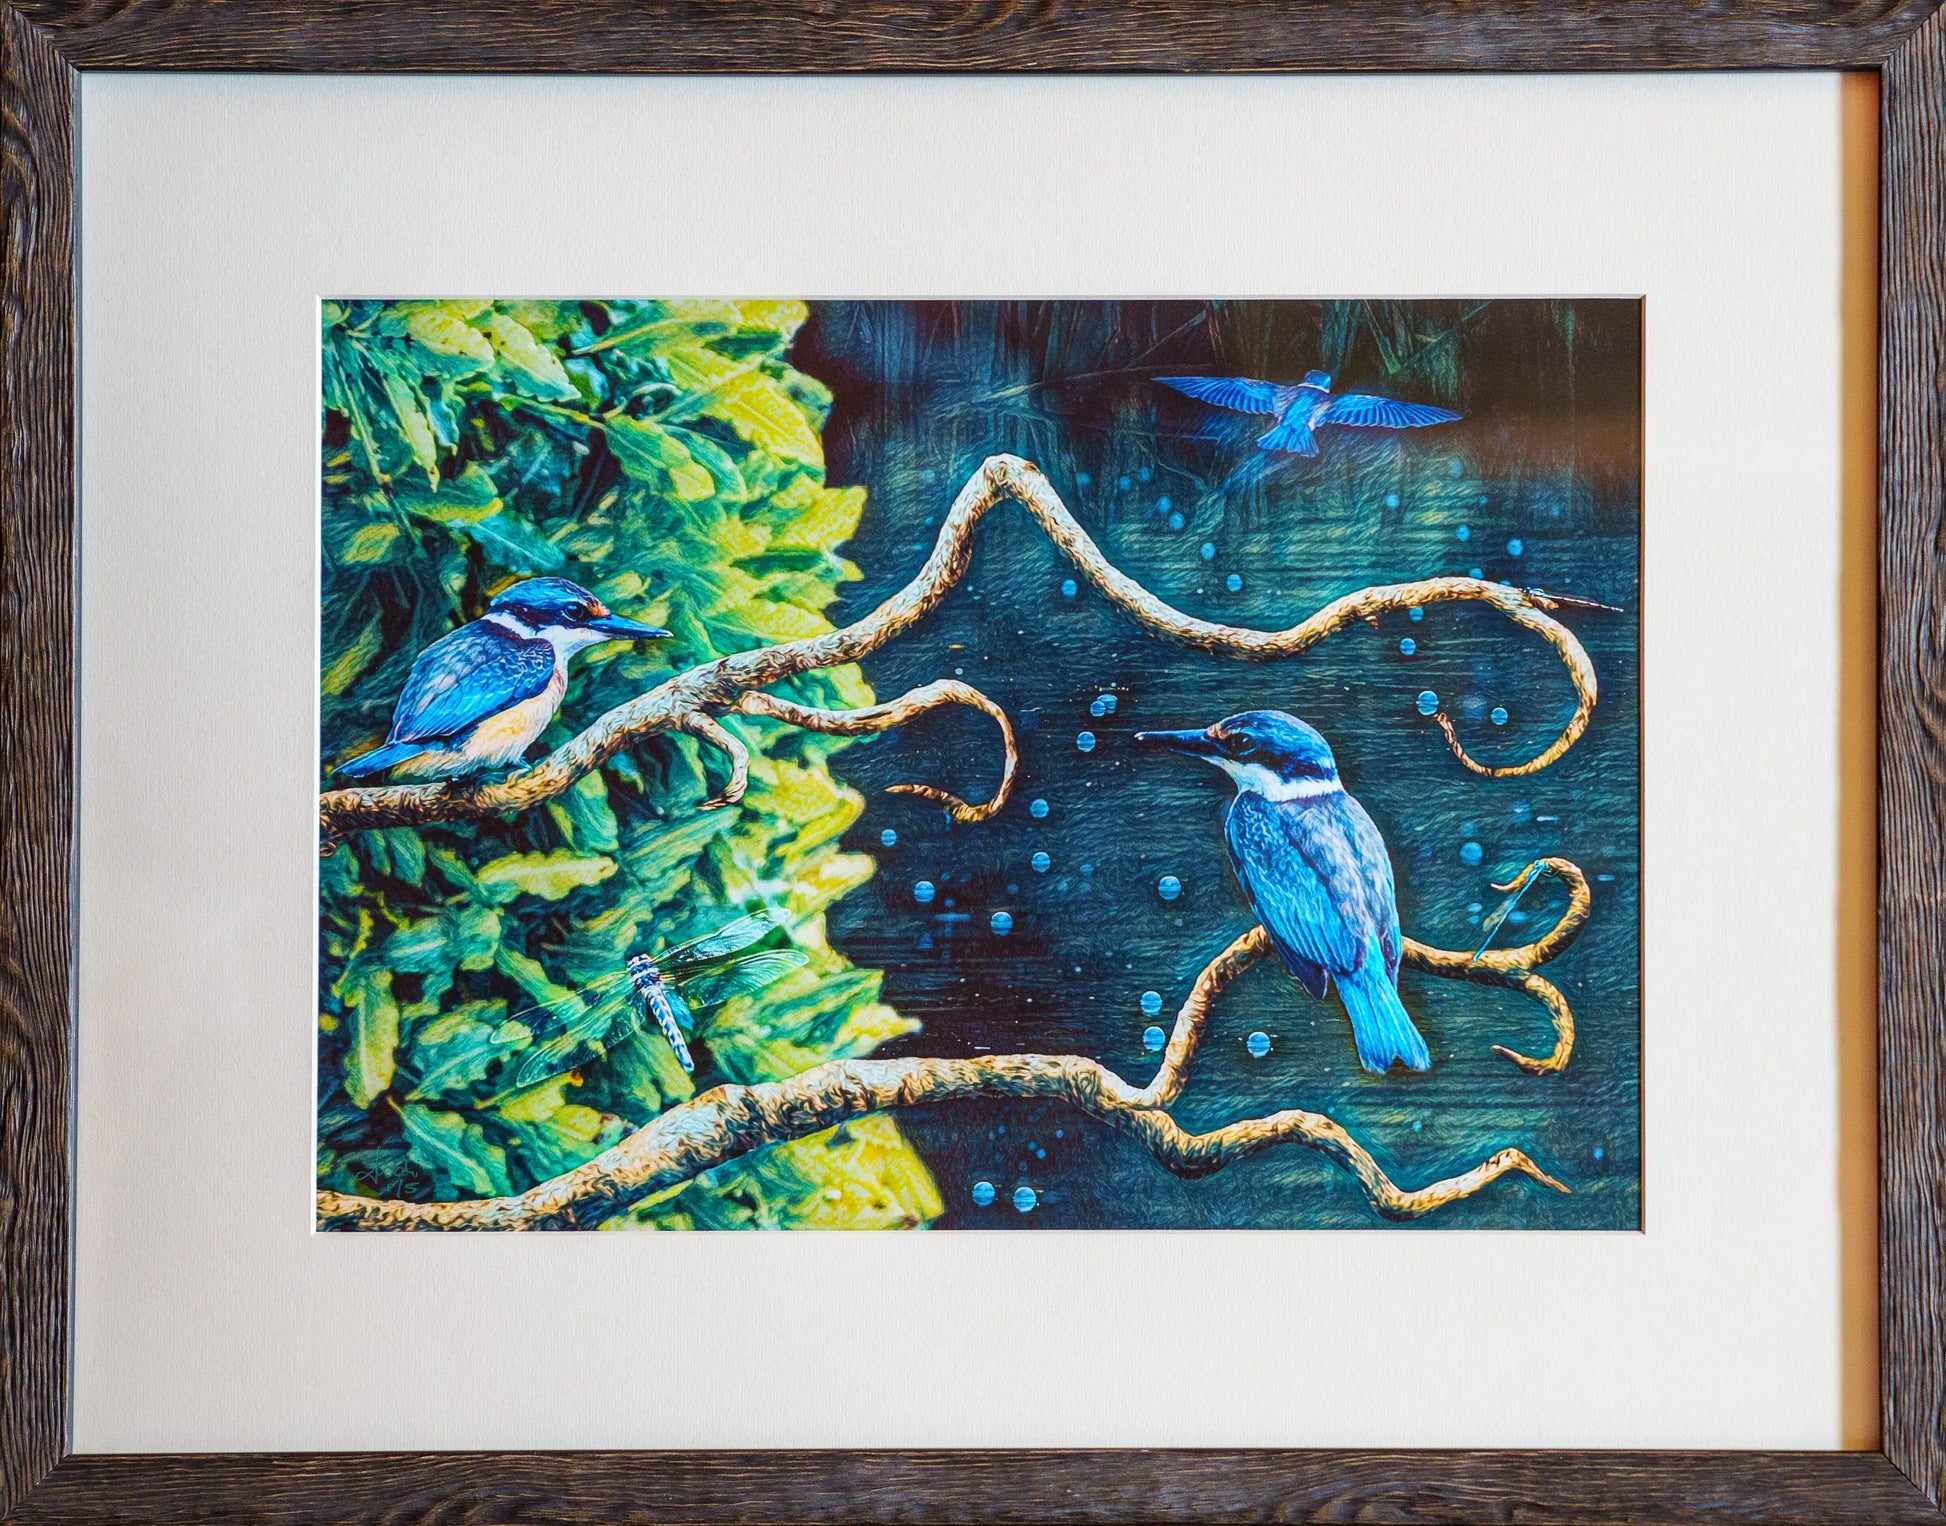 Framed picture of two kingfishers